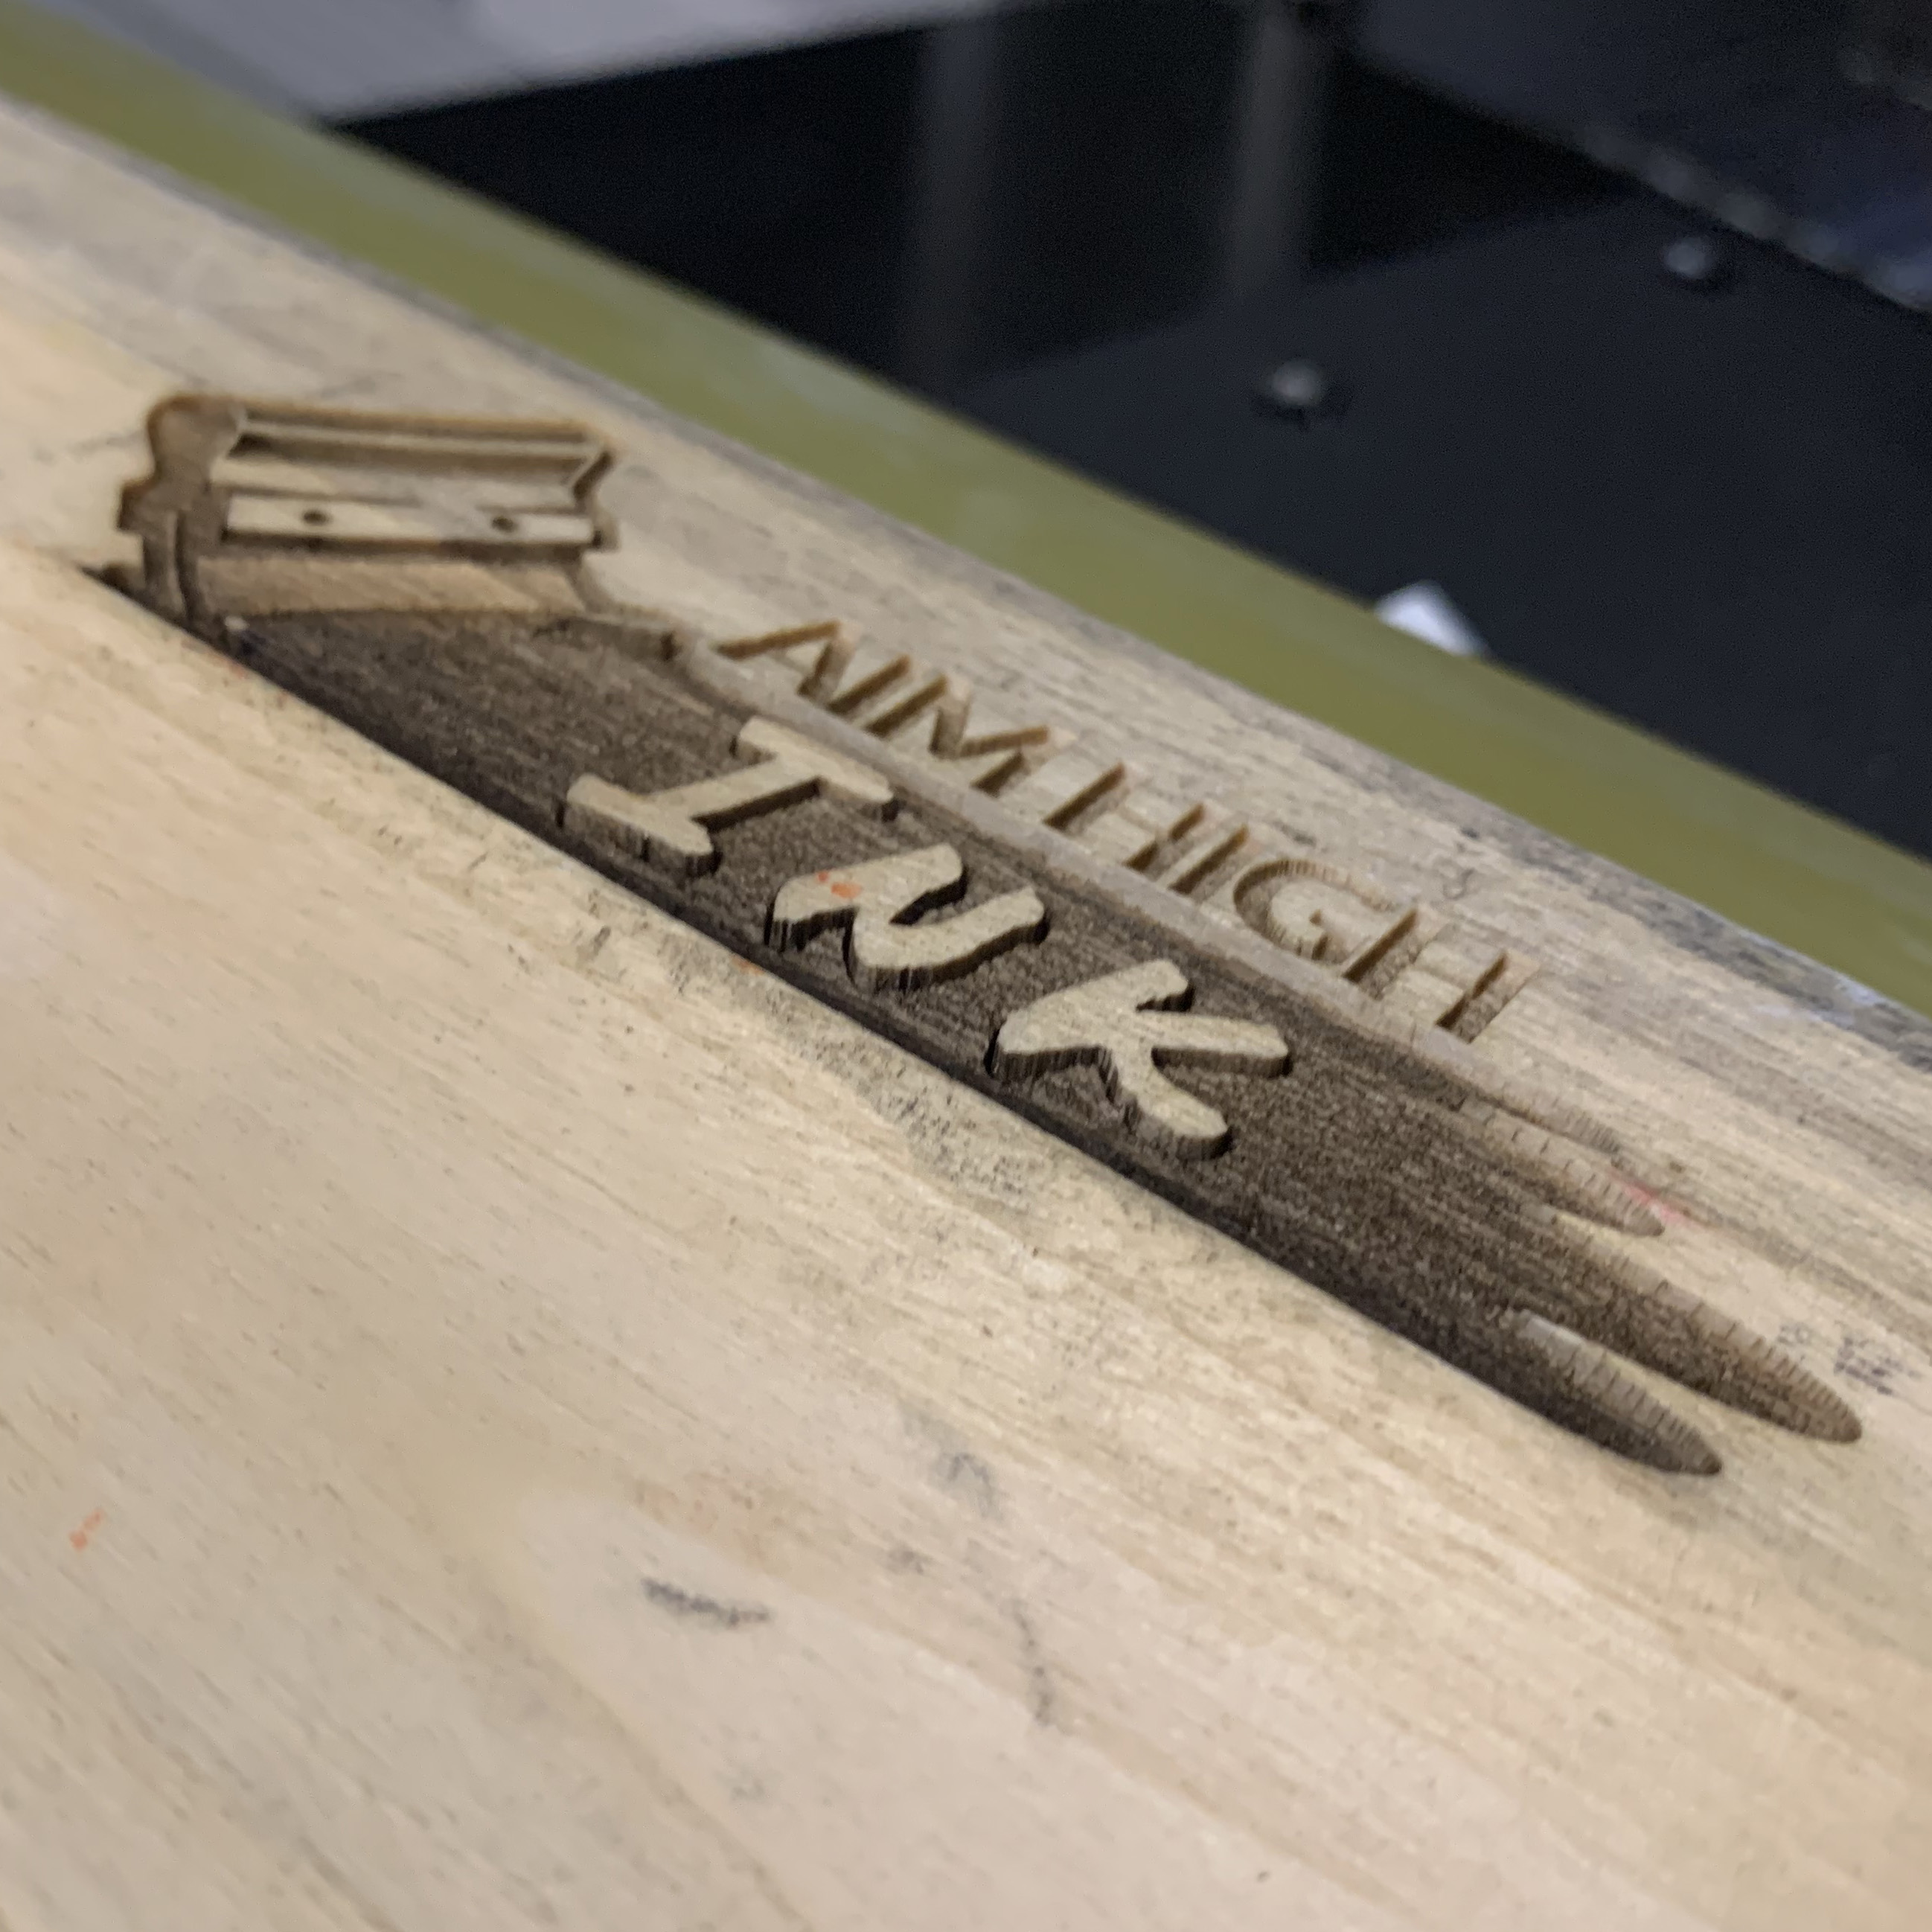 Laser Engraving: Aim High Ink's logo engraved on a wooden squeegee